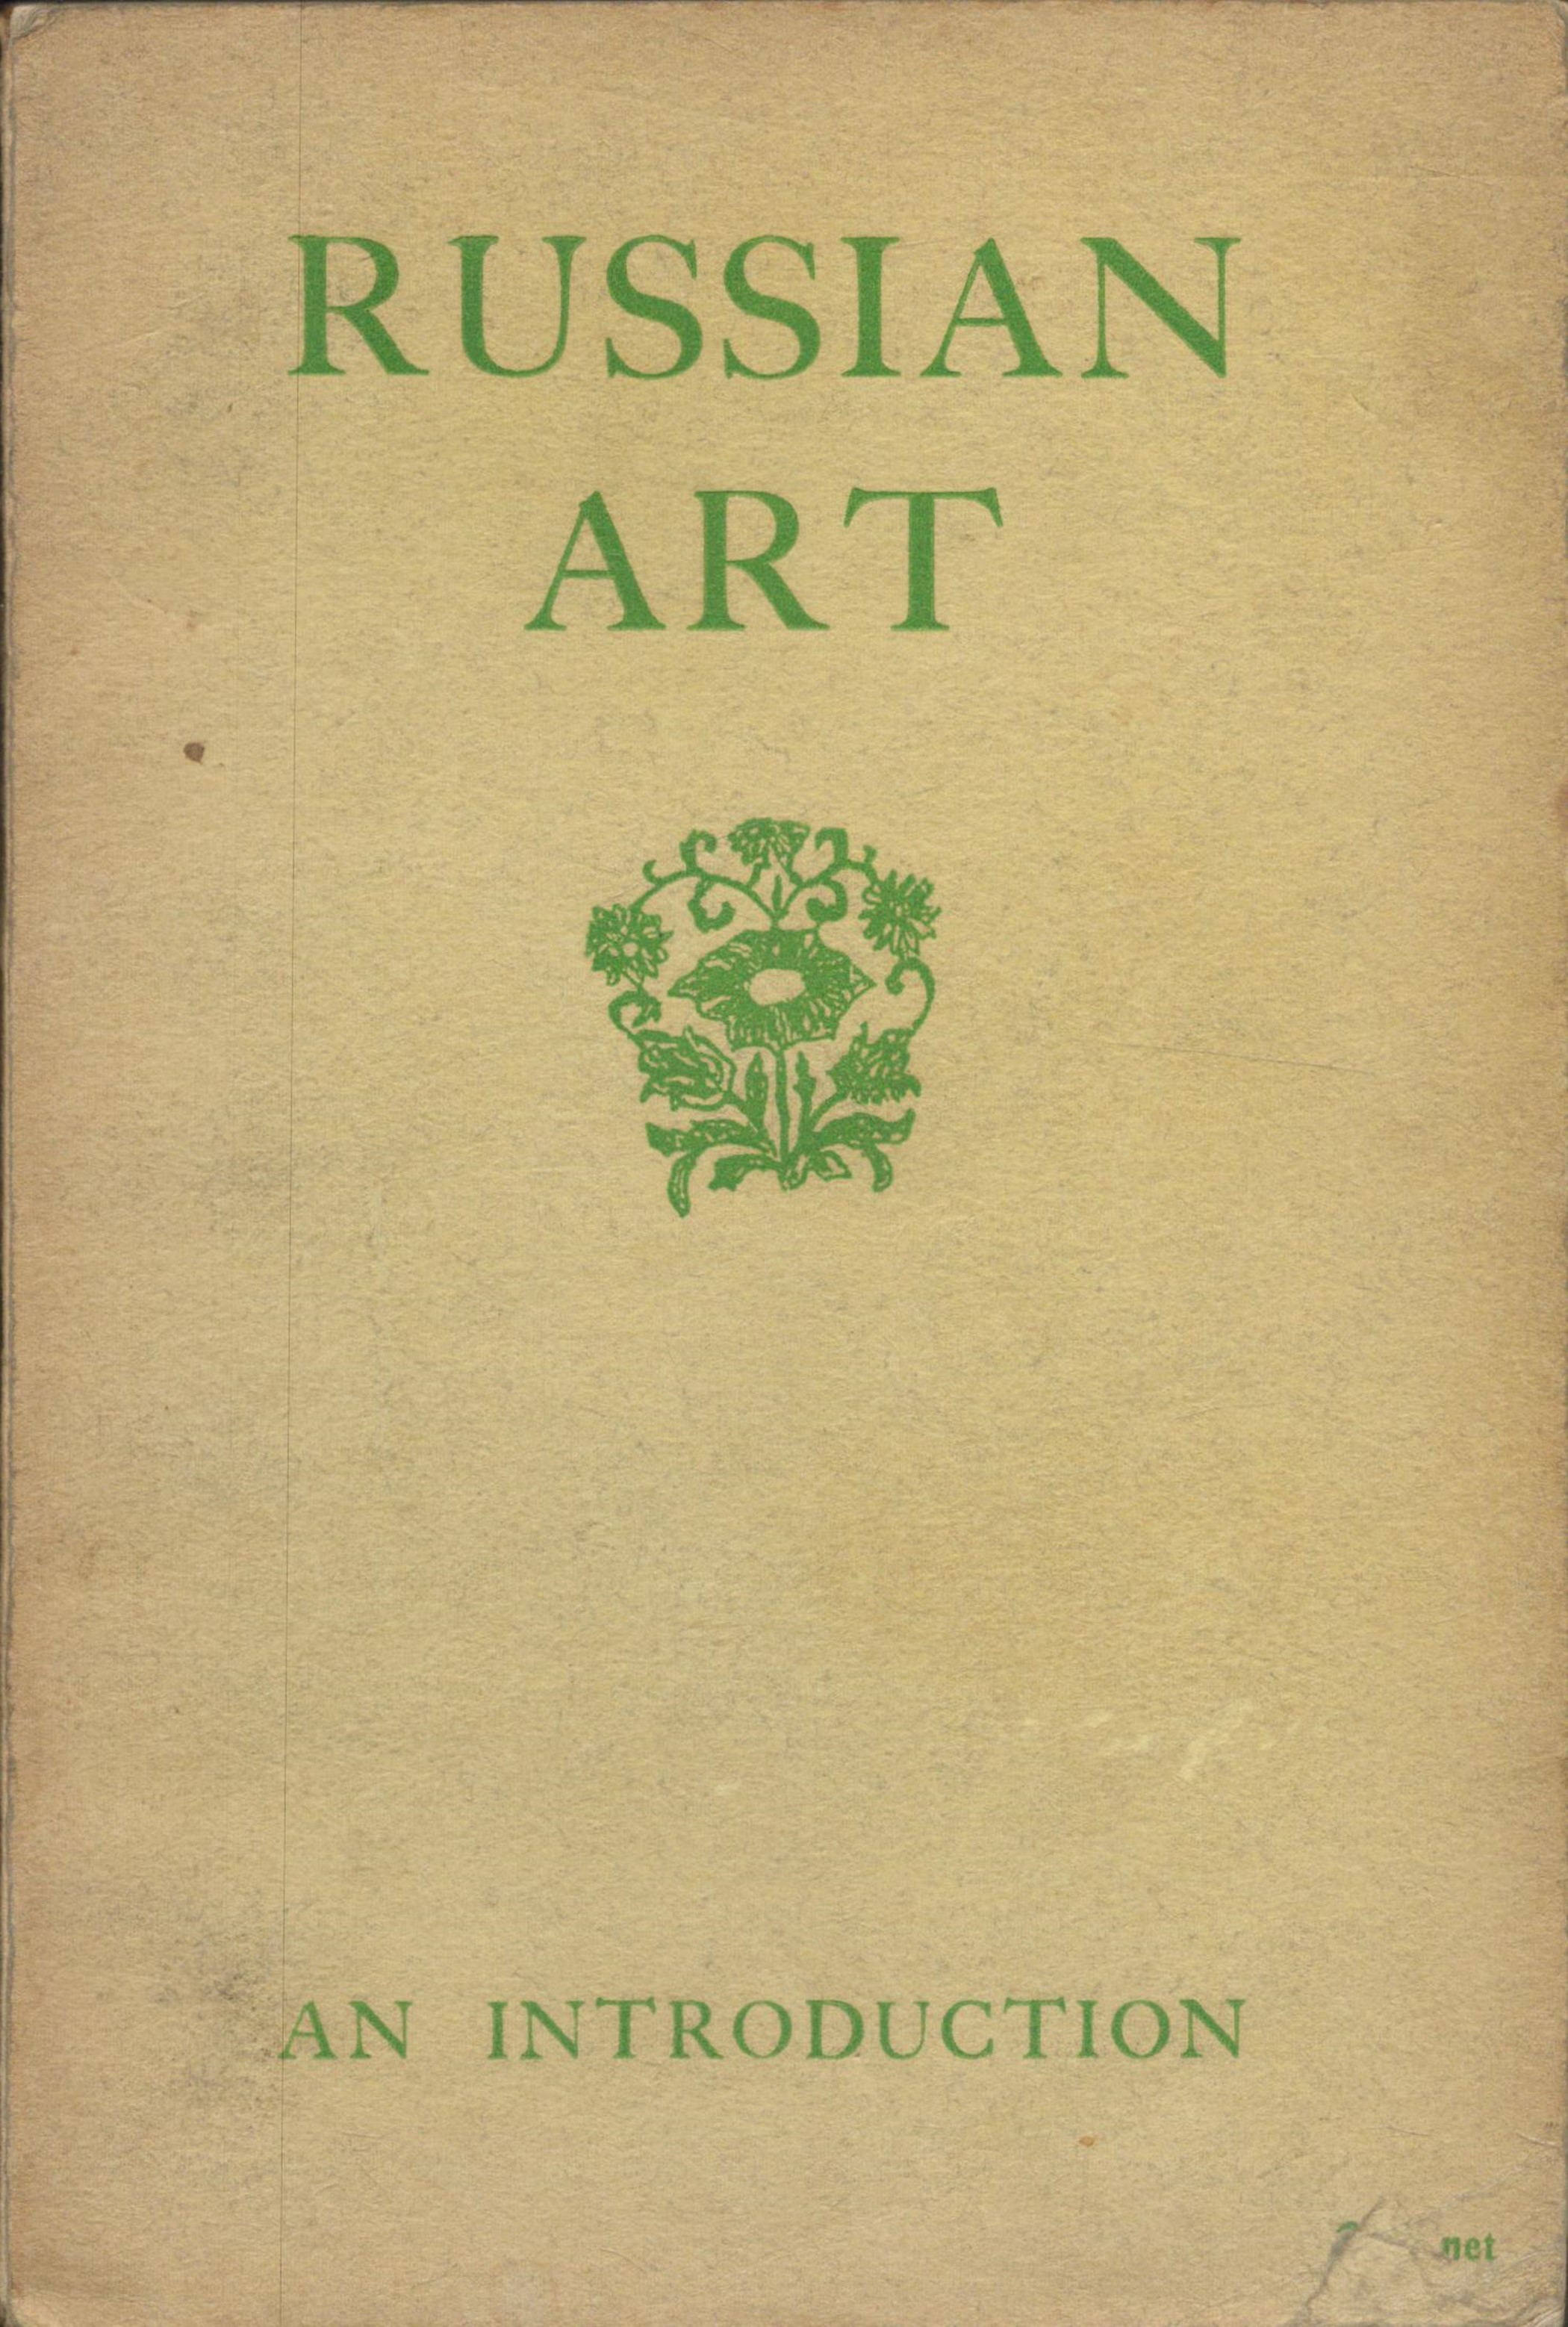 Russian Art. Edited by D. Talbot Rice and Watson Gordon, Professor of Fine Art. Published in